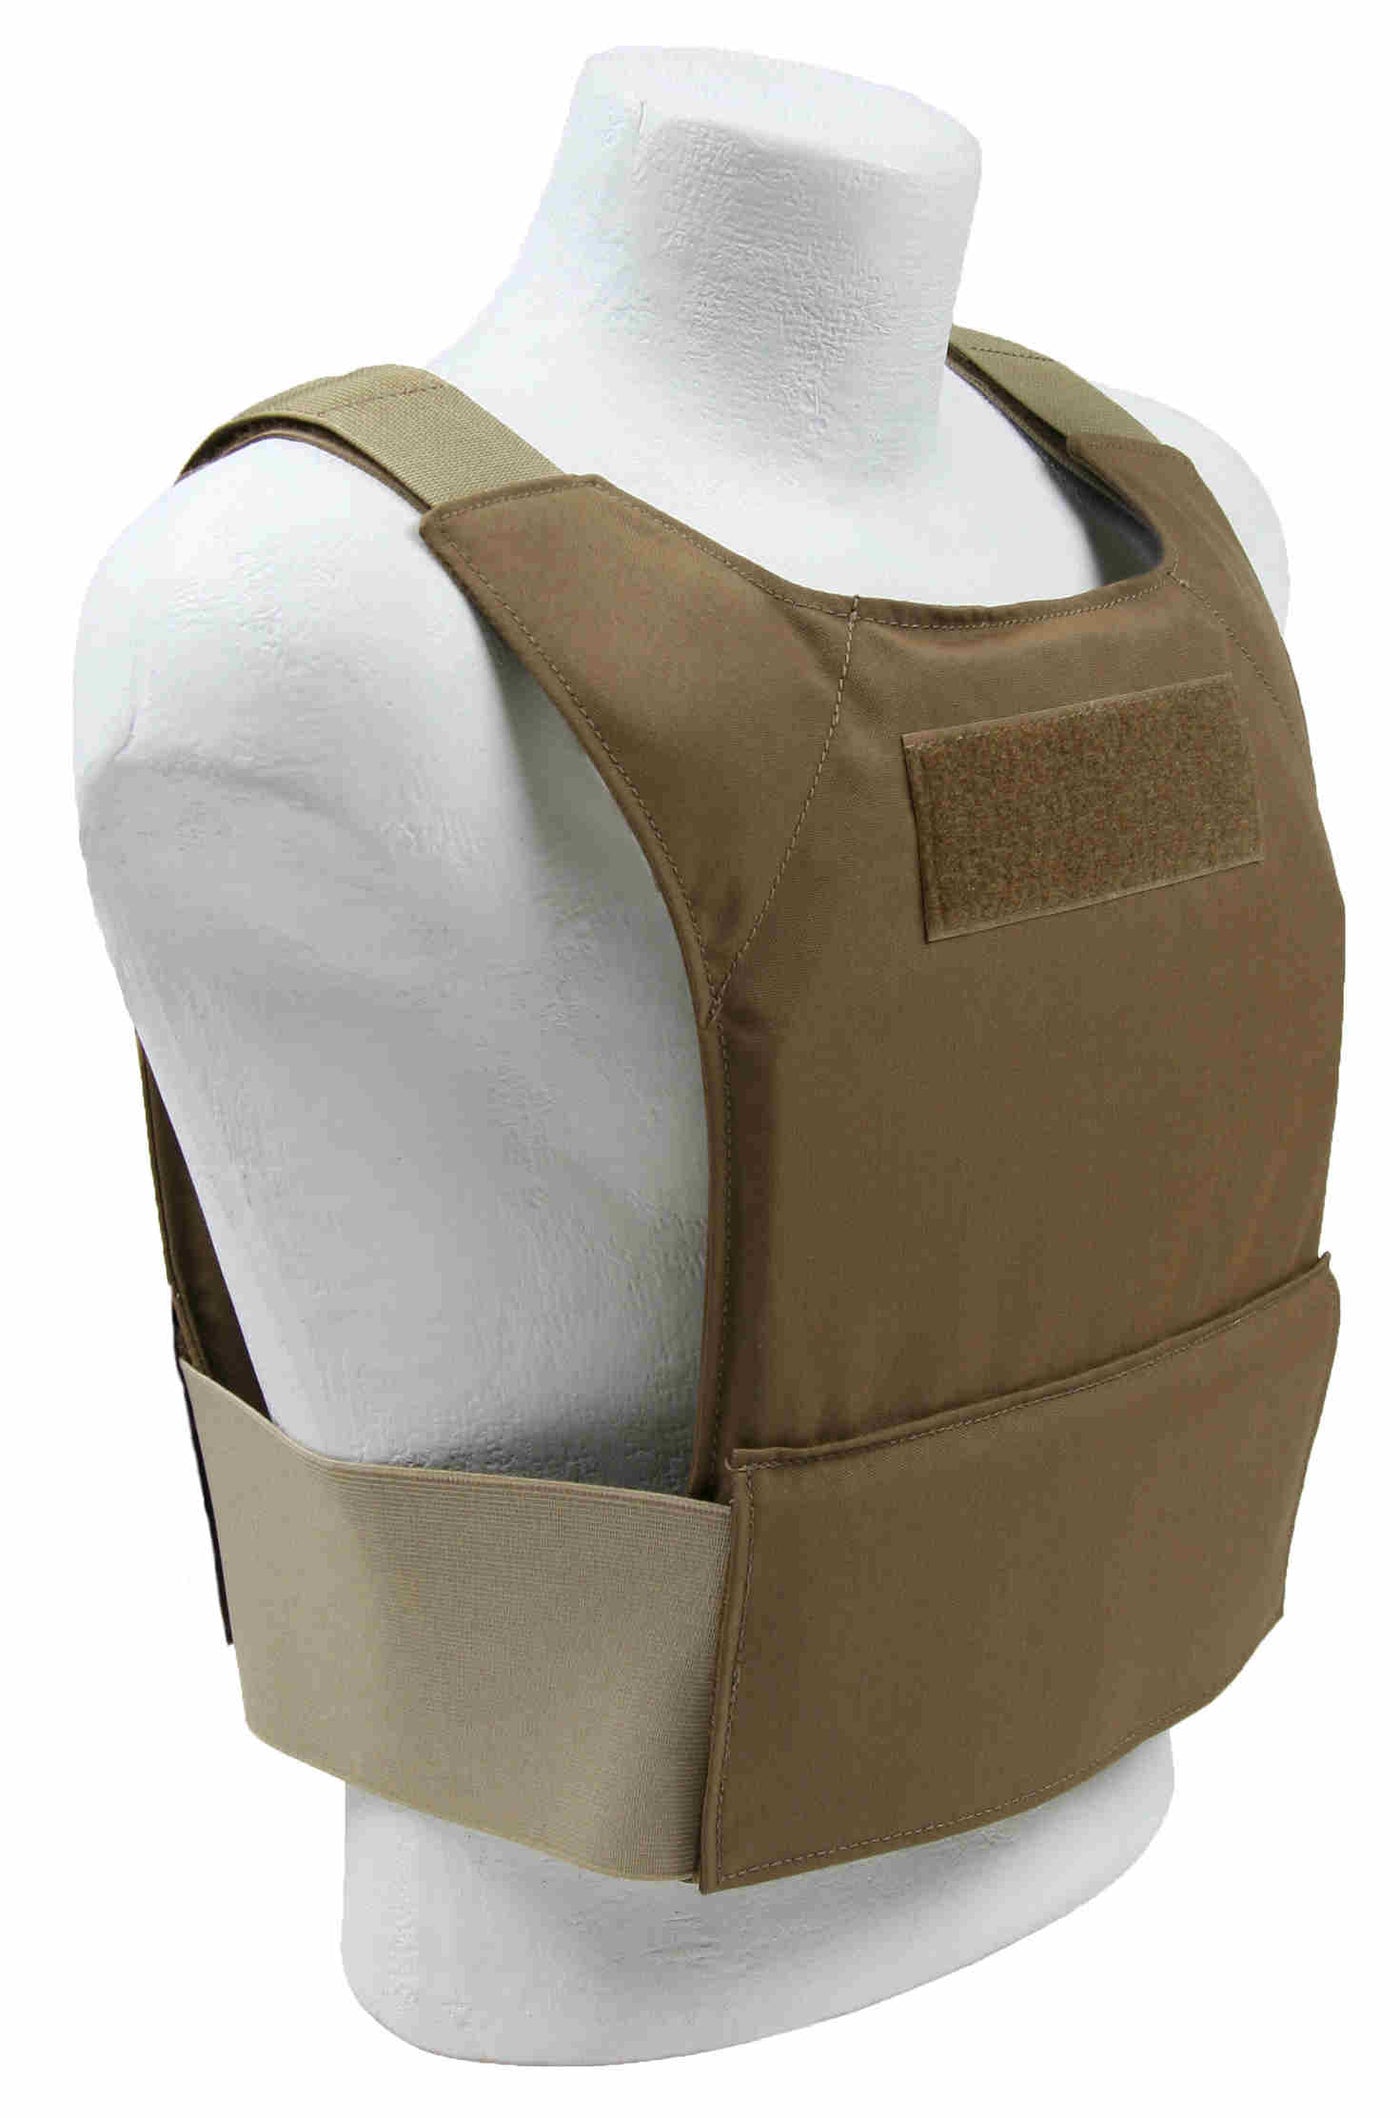 SAPI/ESAPI Extreme Concealable Plate Carrier